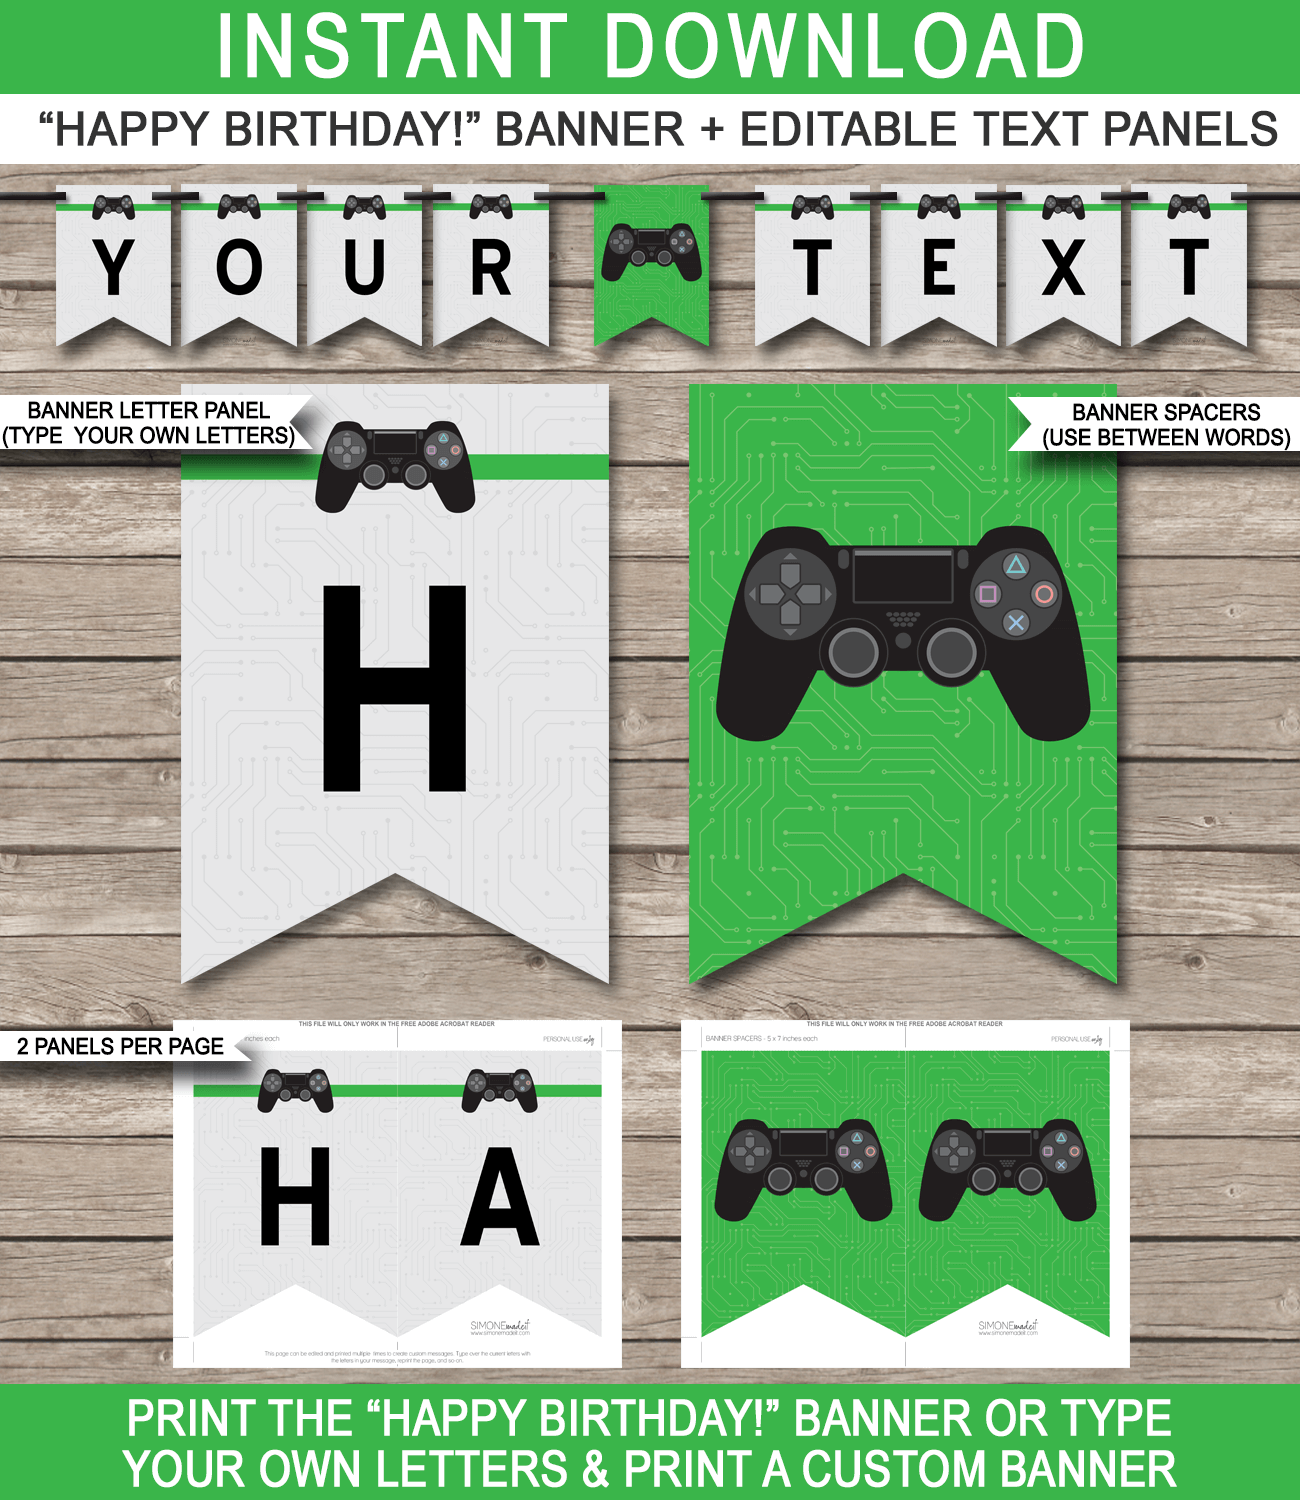 Printable Playstation Party Pennant Banner Template | Video Game Theme Happy Birthday Banner | Custom Banner | DIY Editable Template | Instant Download via simonemadeit.com